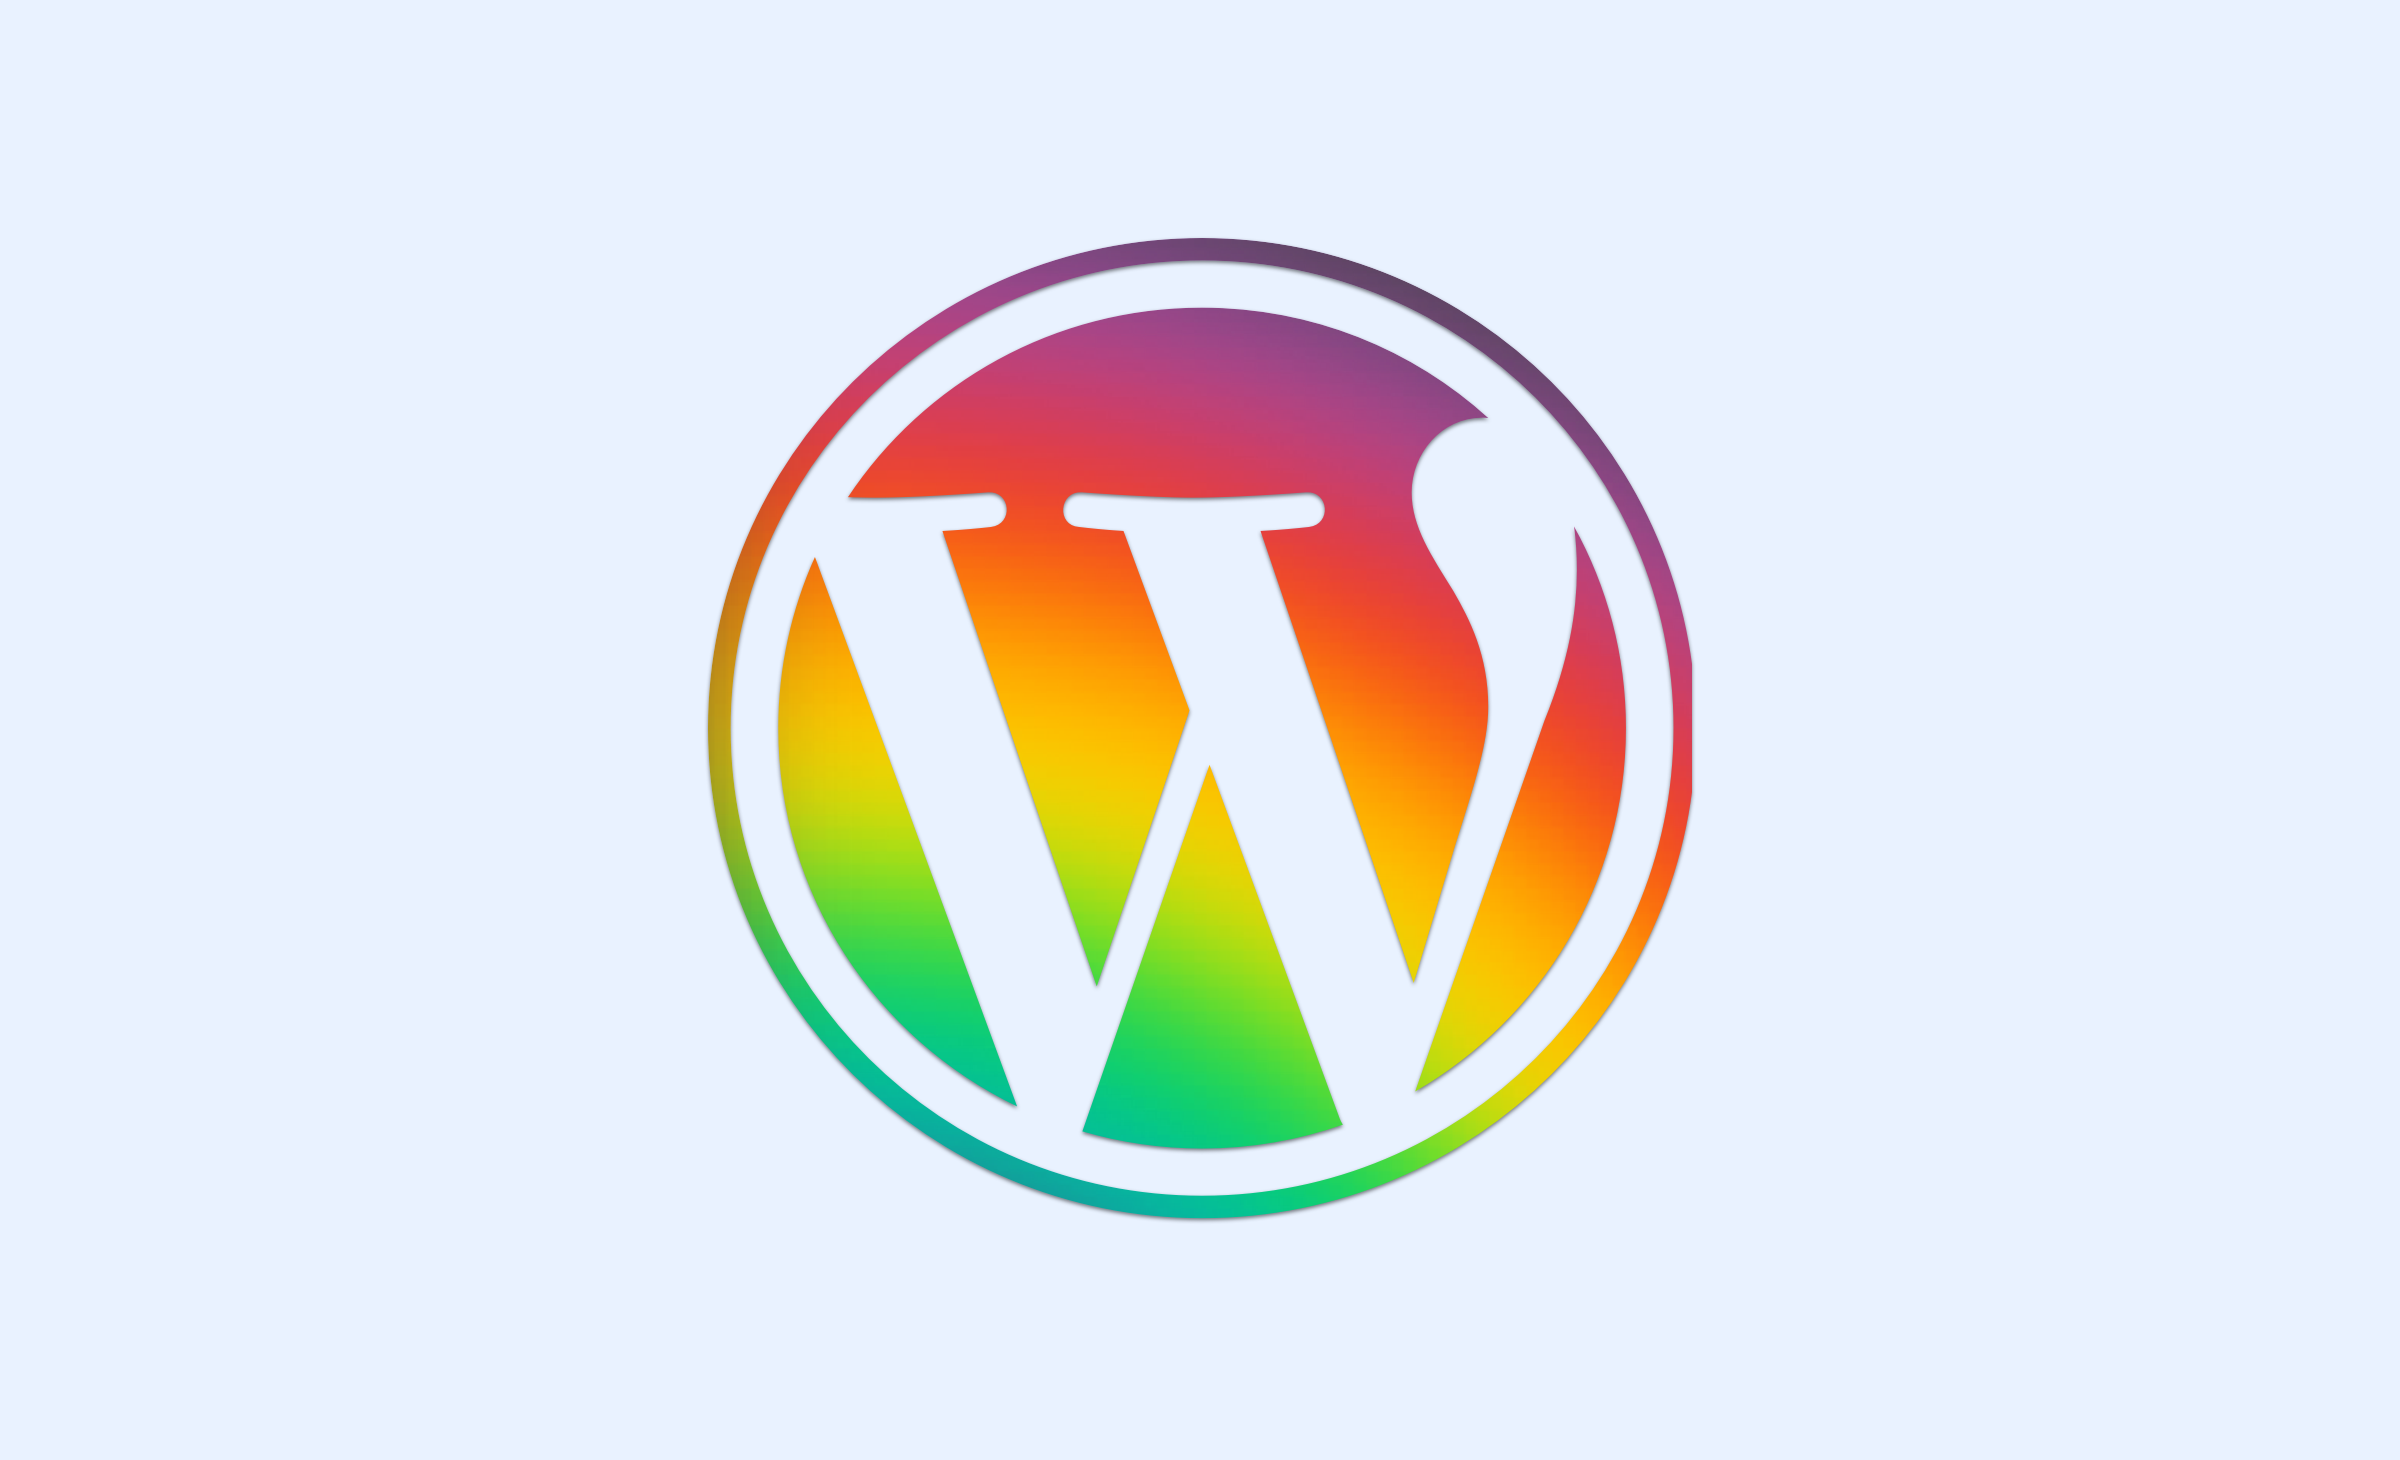 Welcome to the demo site for Sign-In With Ethereum for WordPress using RainbowKit